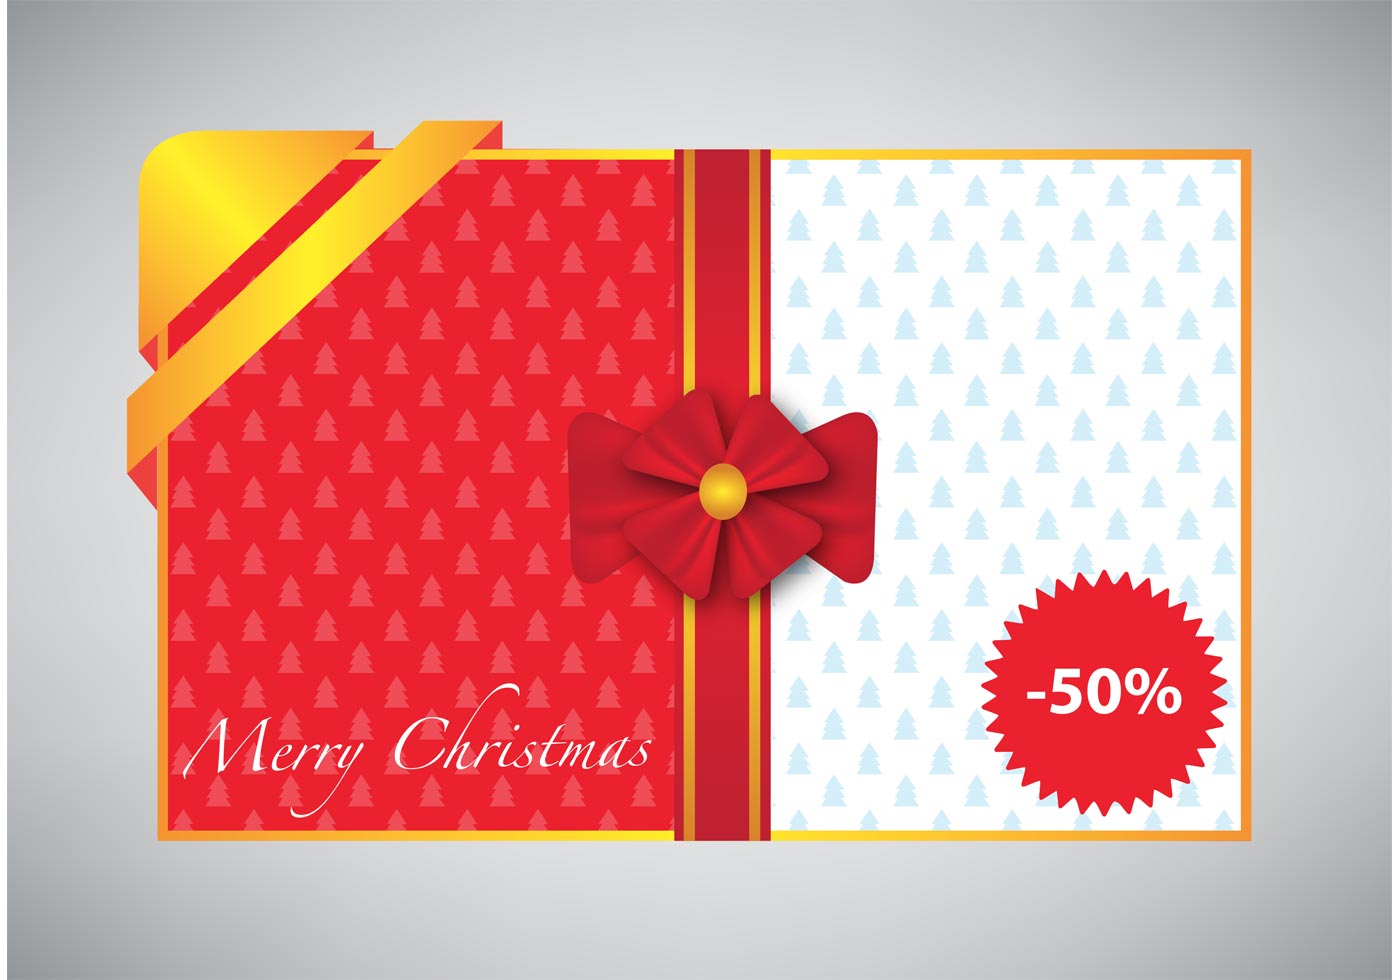 Merry Christmas card with gift ribbon Download Free